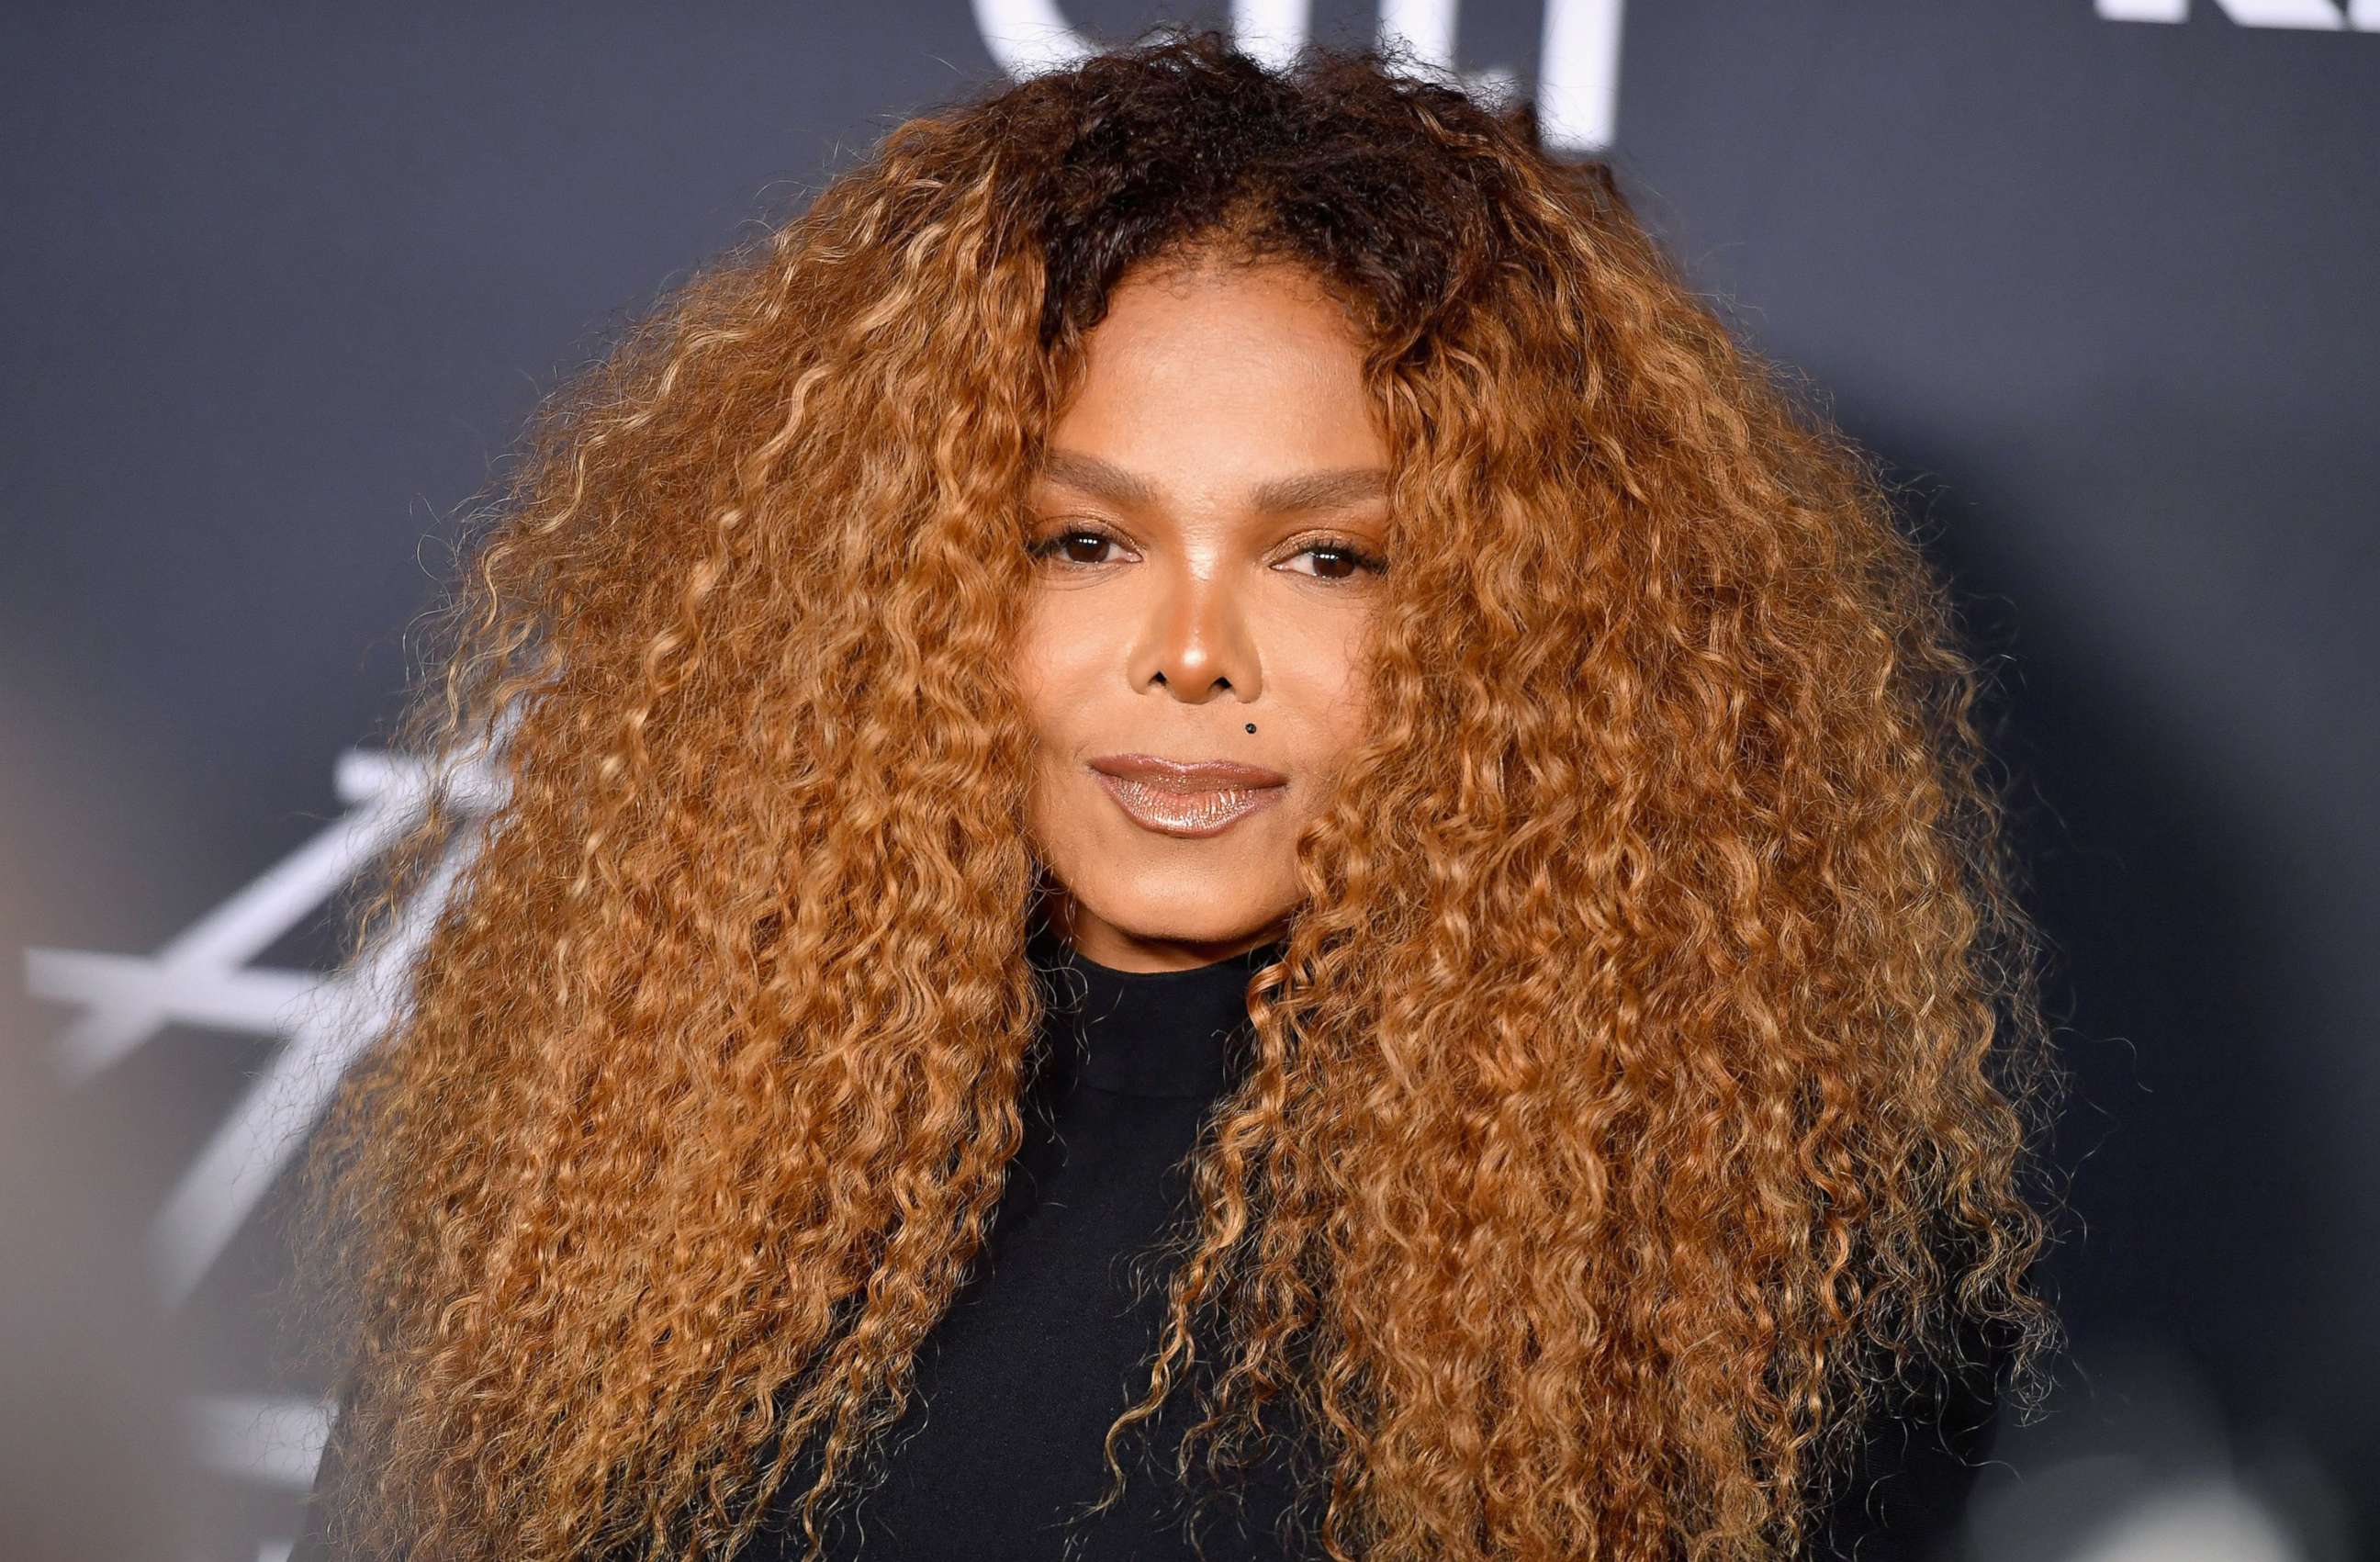 Janet Jackson opens up about women in music, career and how she